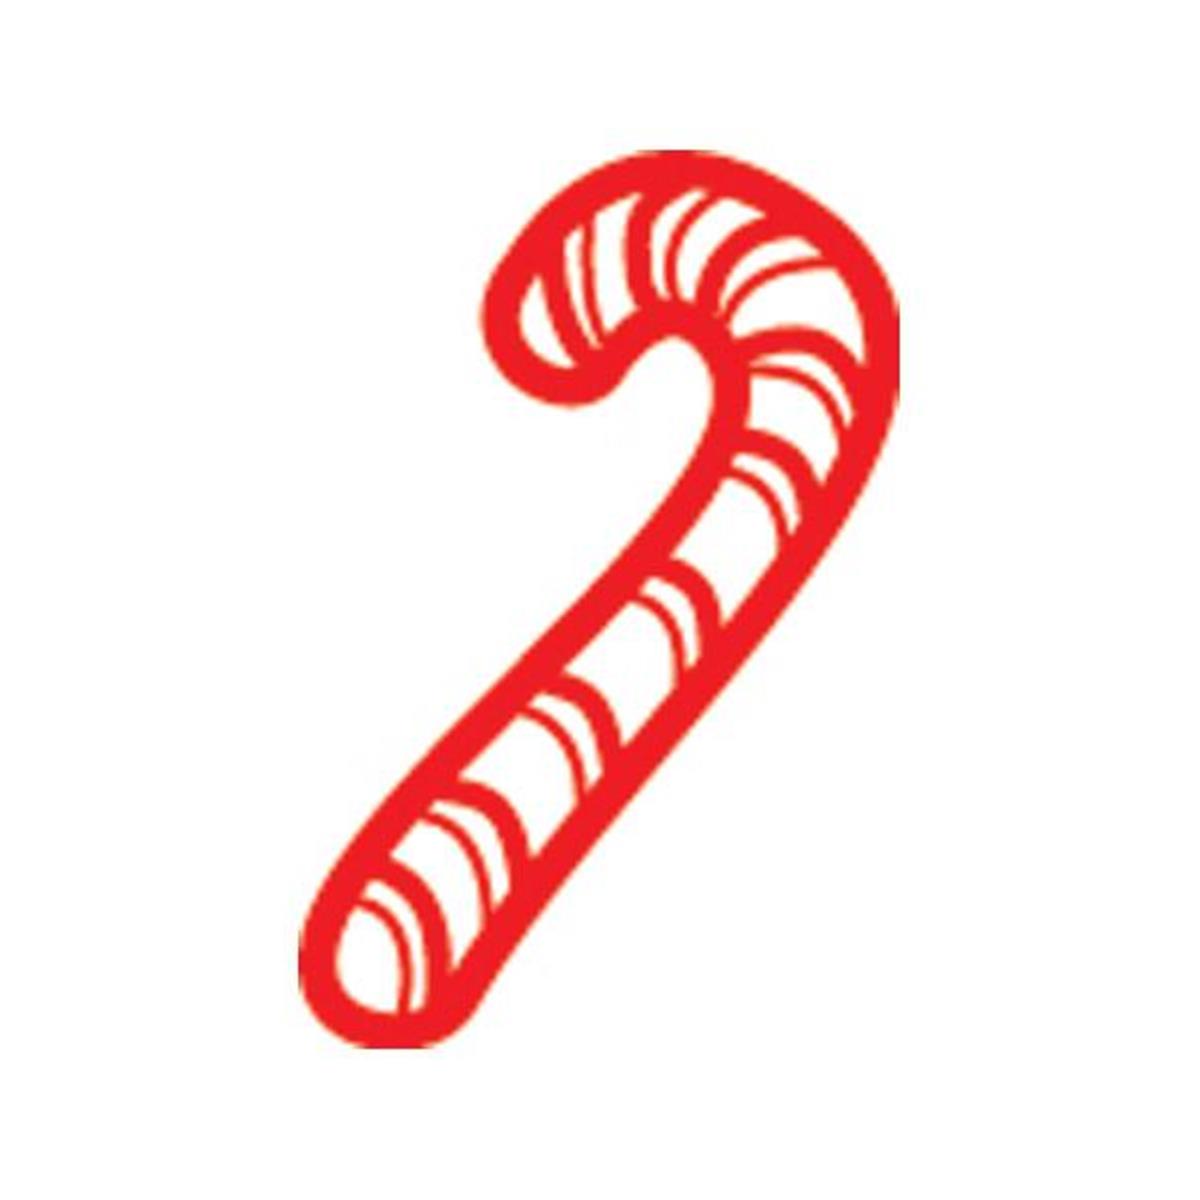 Picture of Creative Shapes Etc SE-0460 0.5 x 0.5 in. Incentive Stamp - Candy Cane